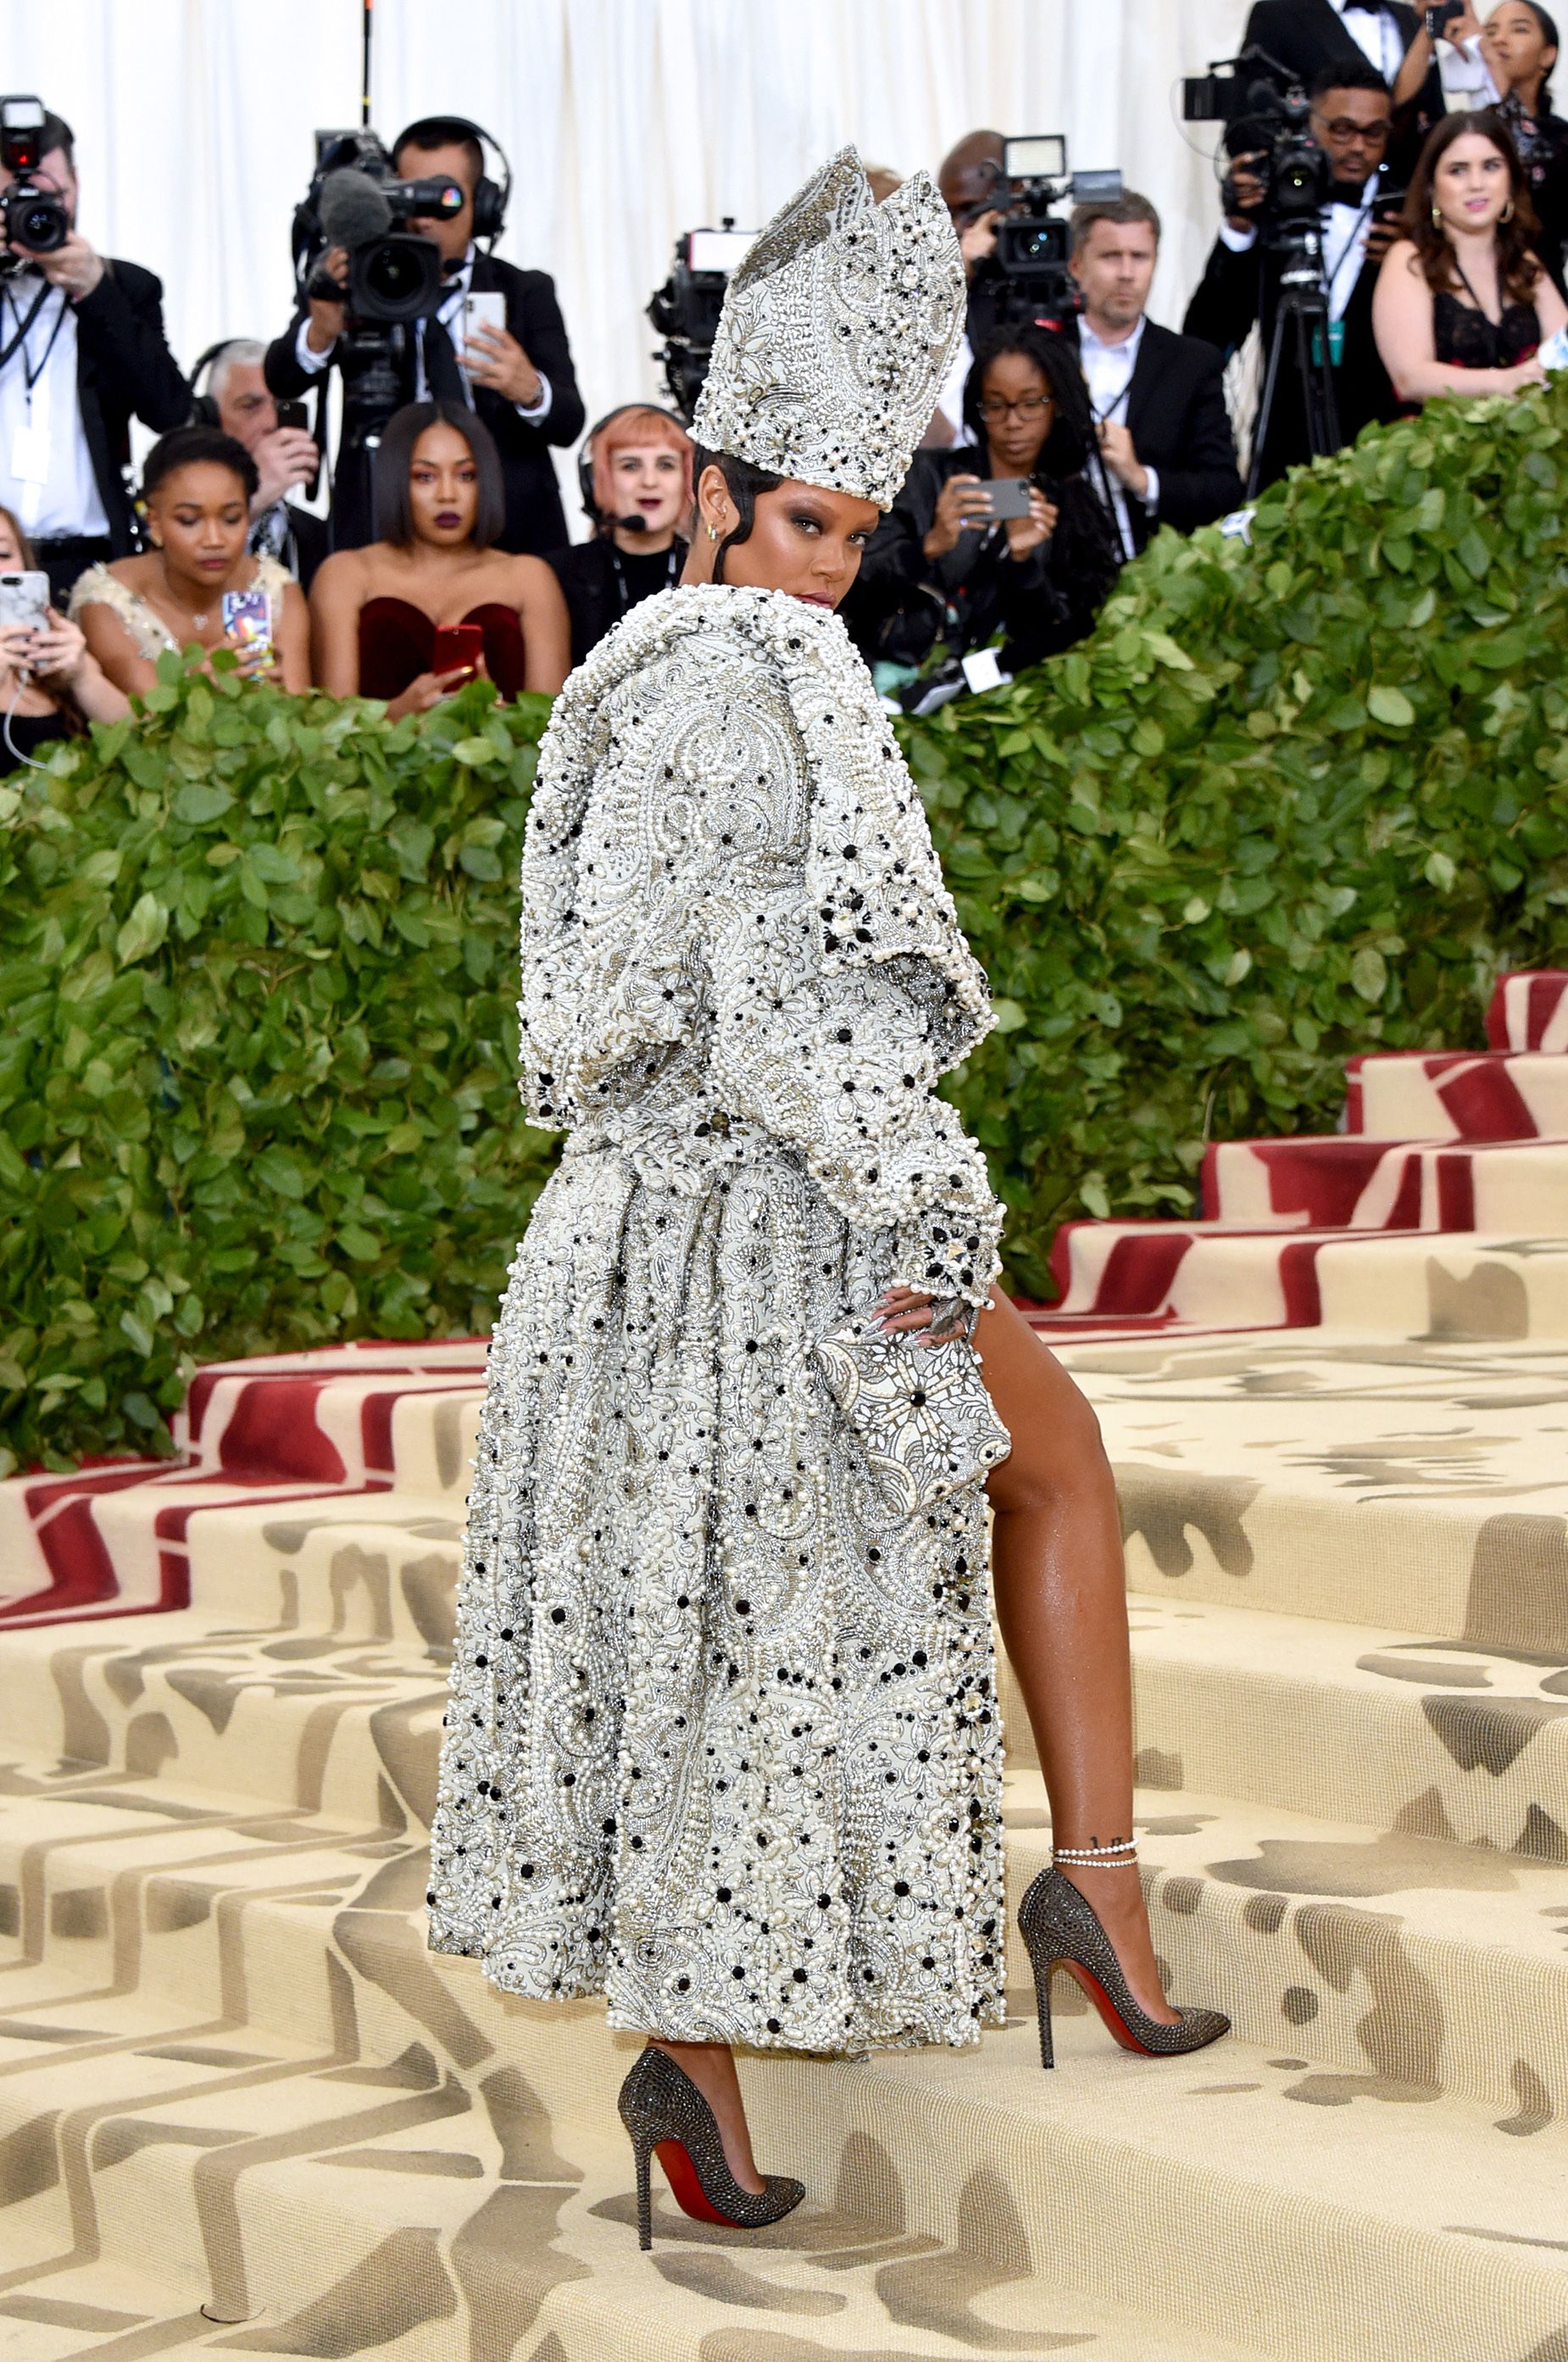 The red sole is a true red carpet staple. Rihanna chose a pair to wear to the 2019 